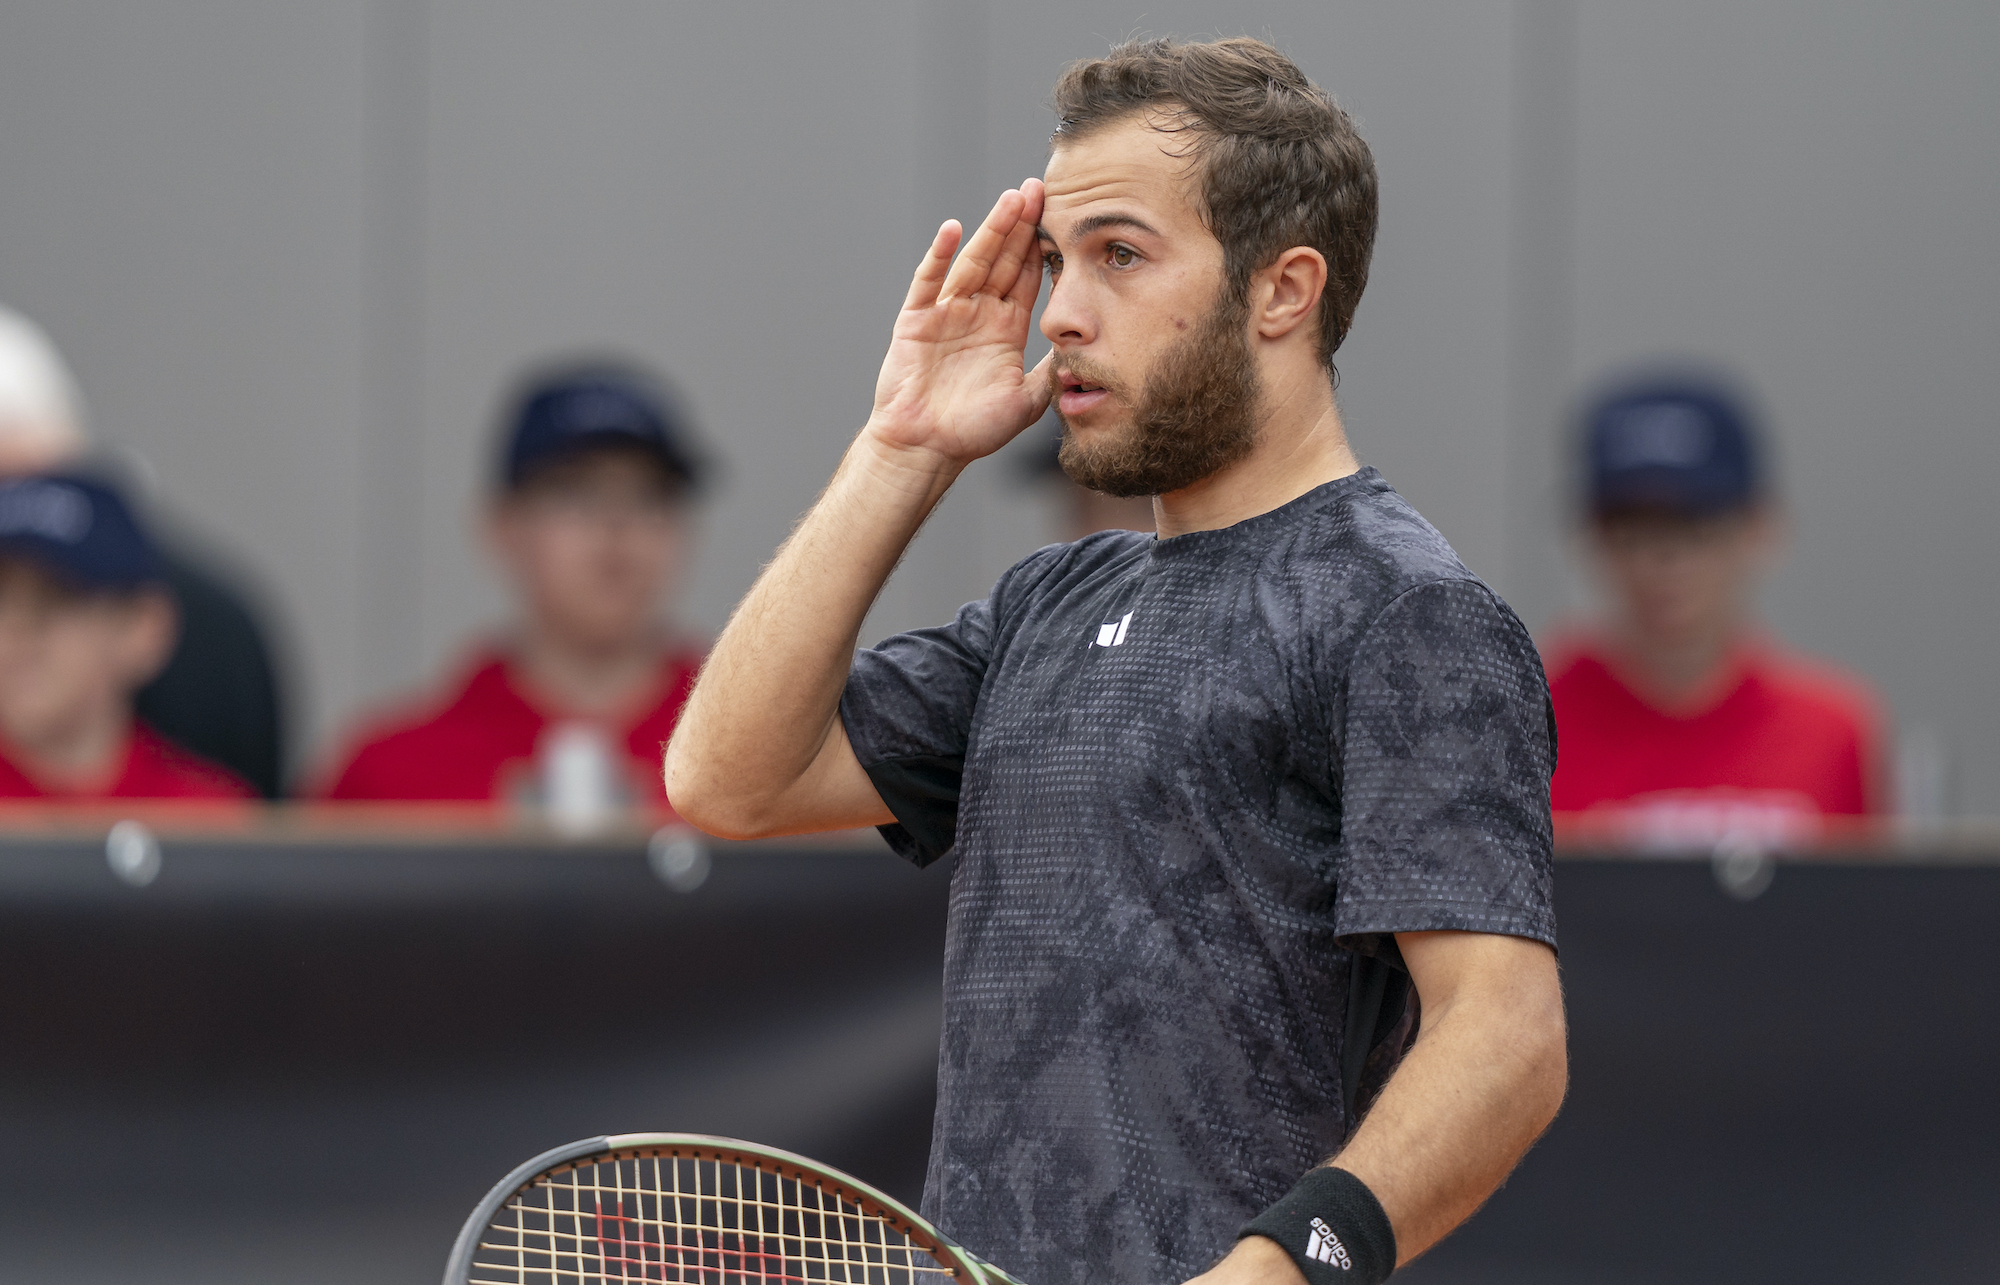 Hugo Gaston of France reacts during his match against Dane Sweeny of Australia during day 5 of the Danube Upper Austria Open 2023, part of the ATP Challenger Tour on May 11, 2023 in Mauthausen, Austria.